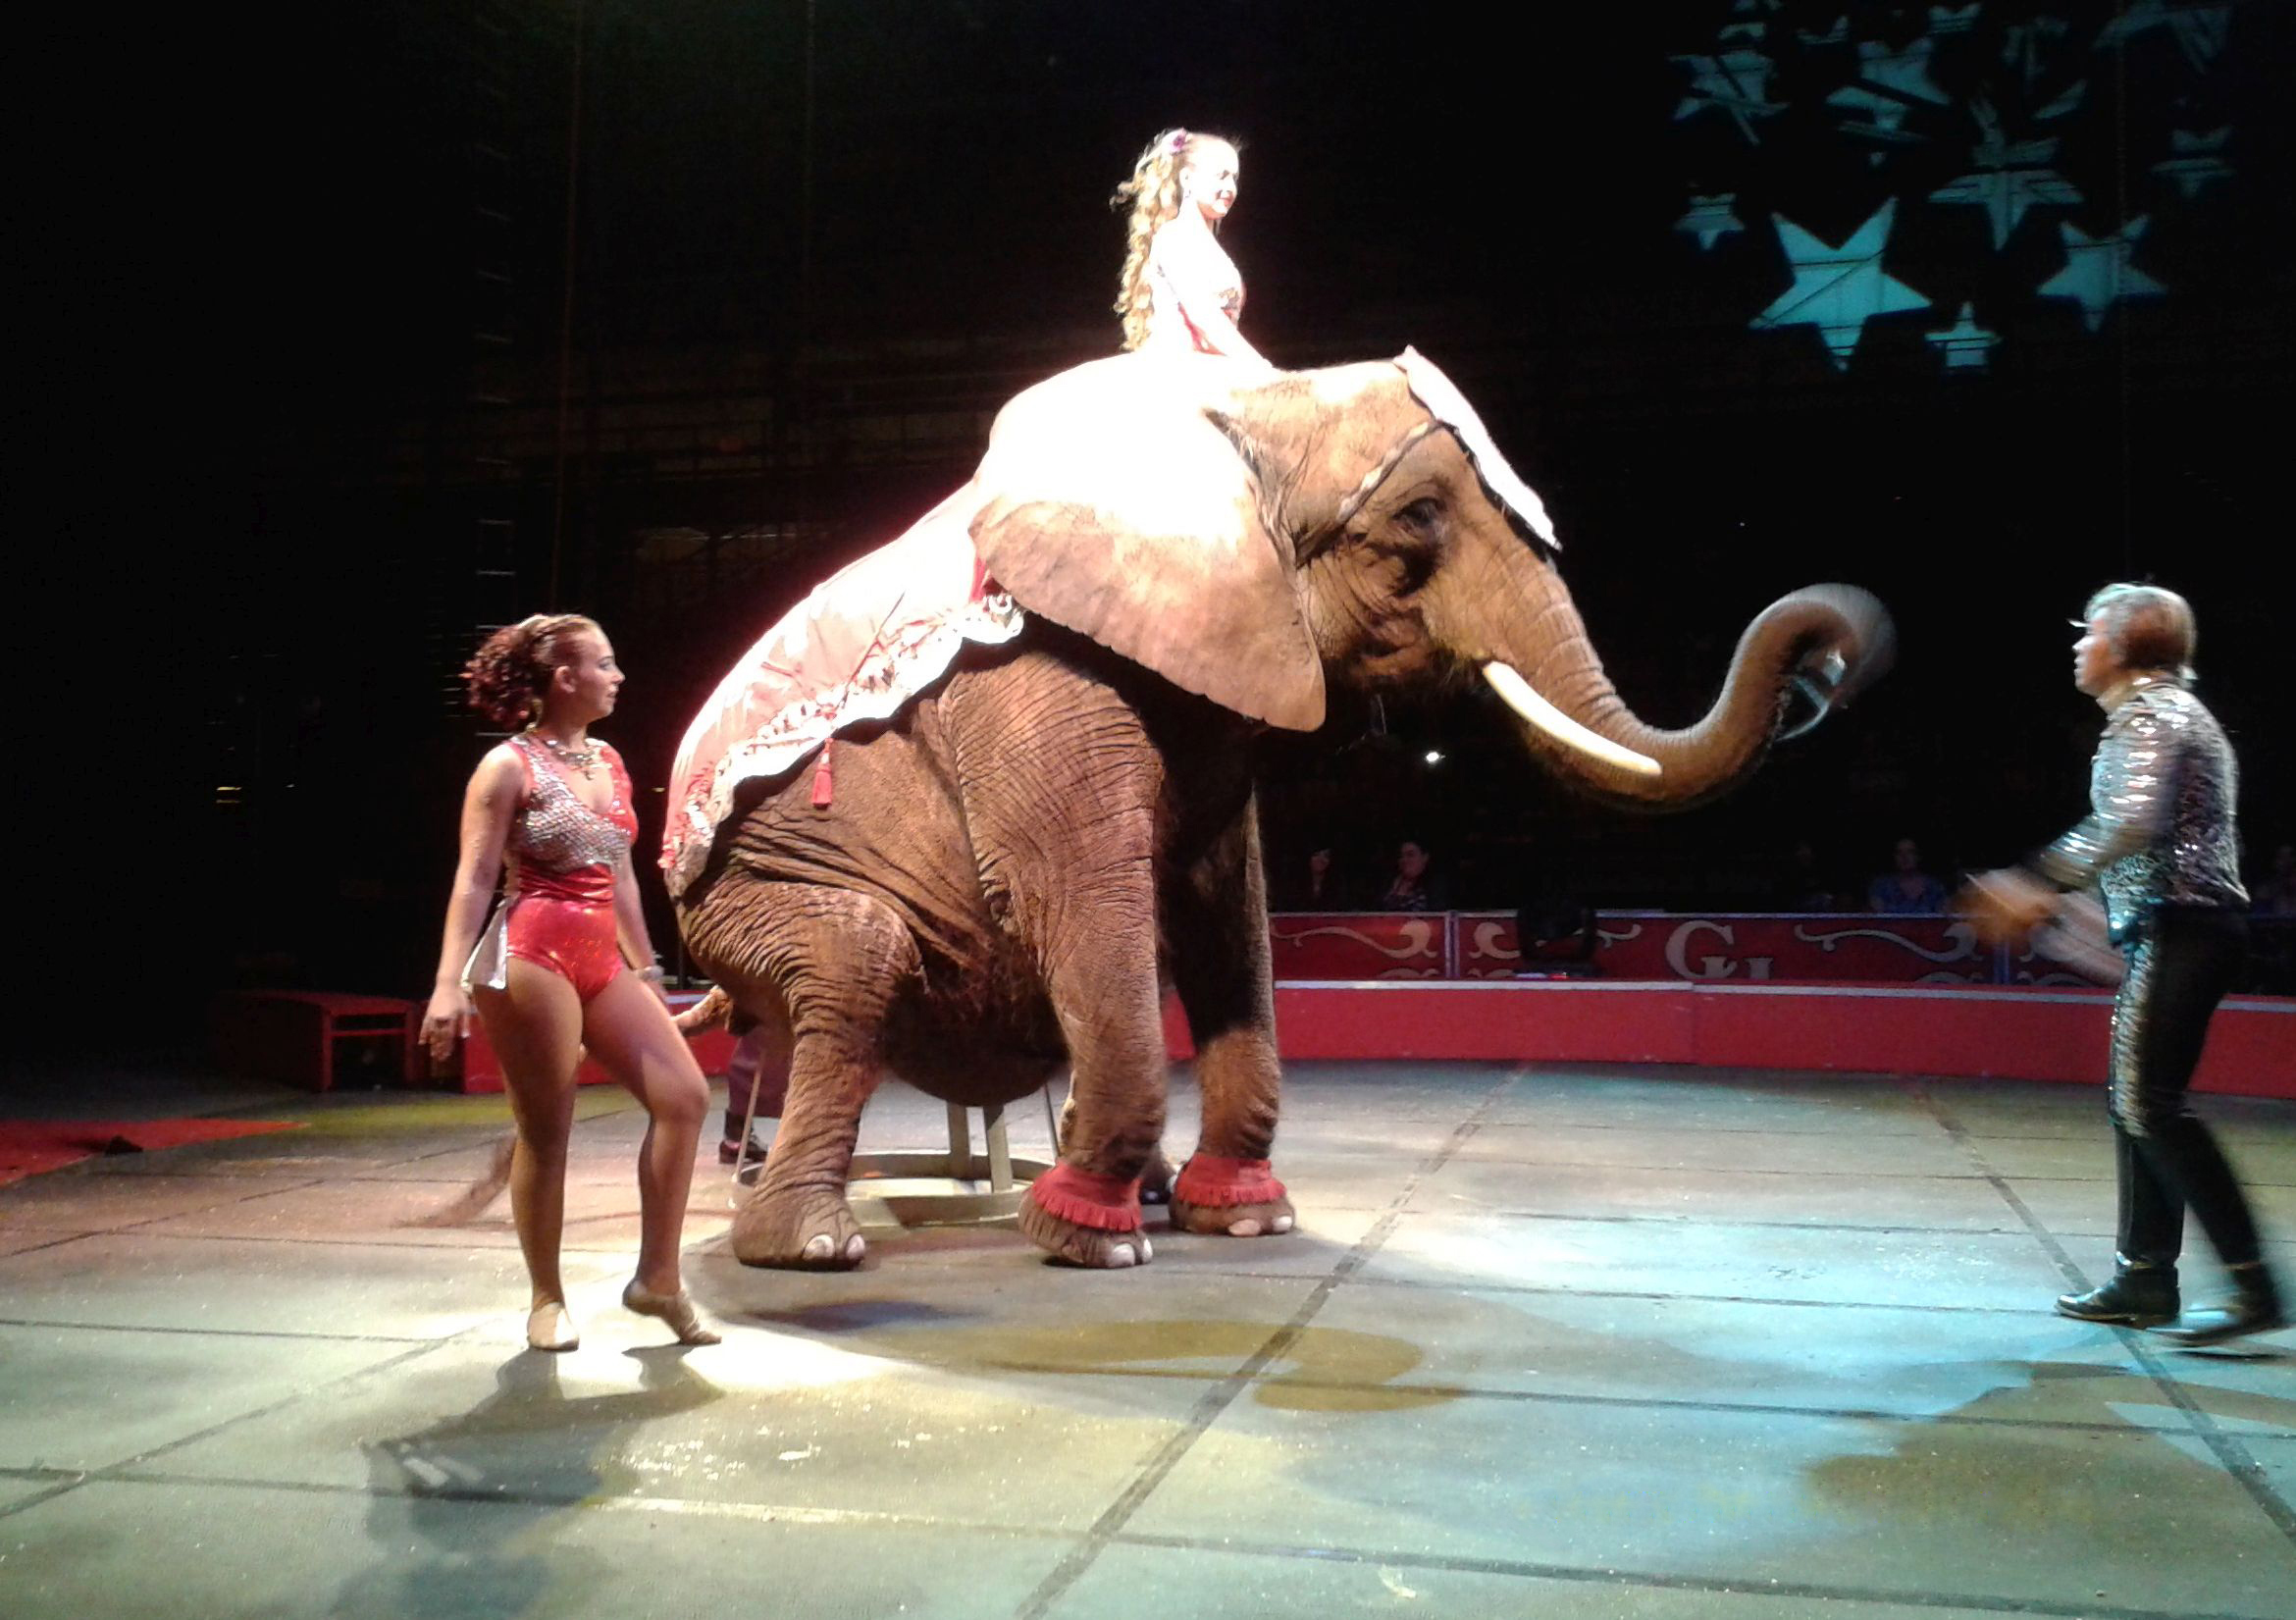 Nosey, and all animals, suffer in circuses